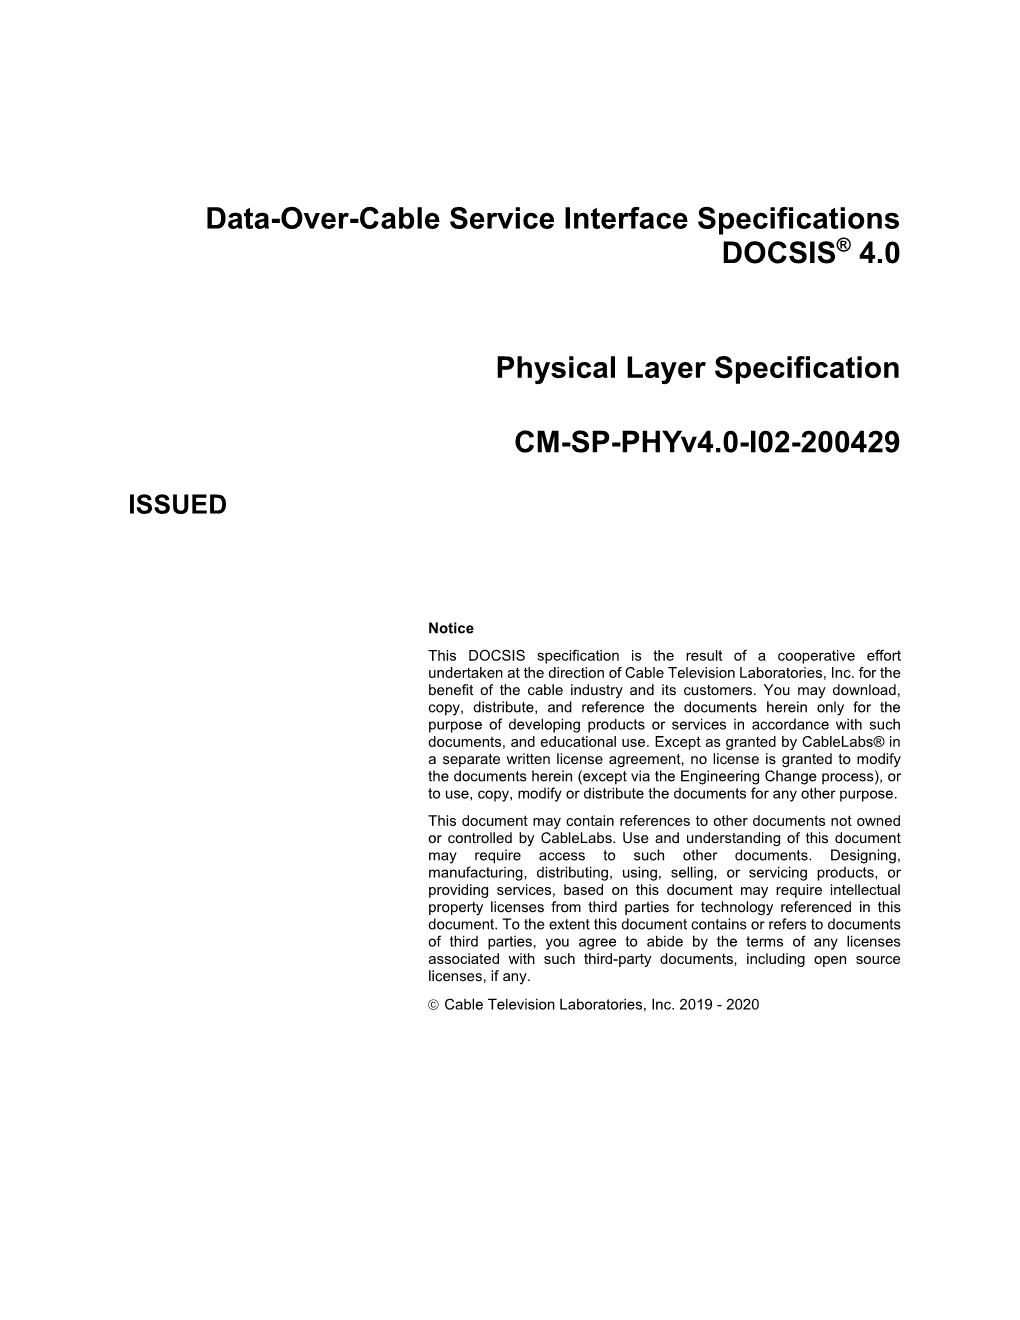 Data-Over-Cable Service Interface Specifications DOCSIS® 4.0 Physical Layer Specification CM-SP-Phyv4.0-I02-200429